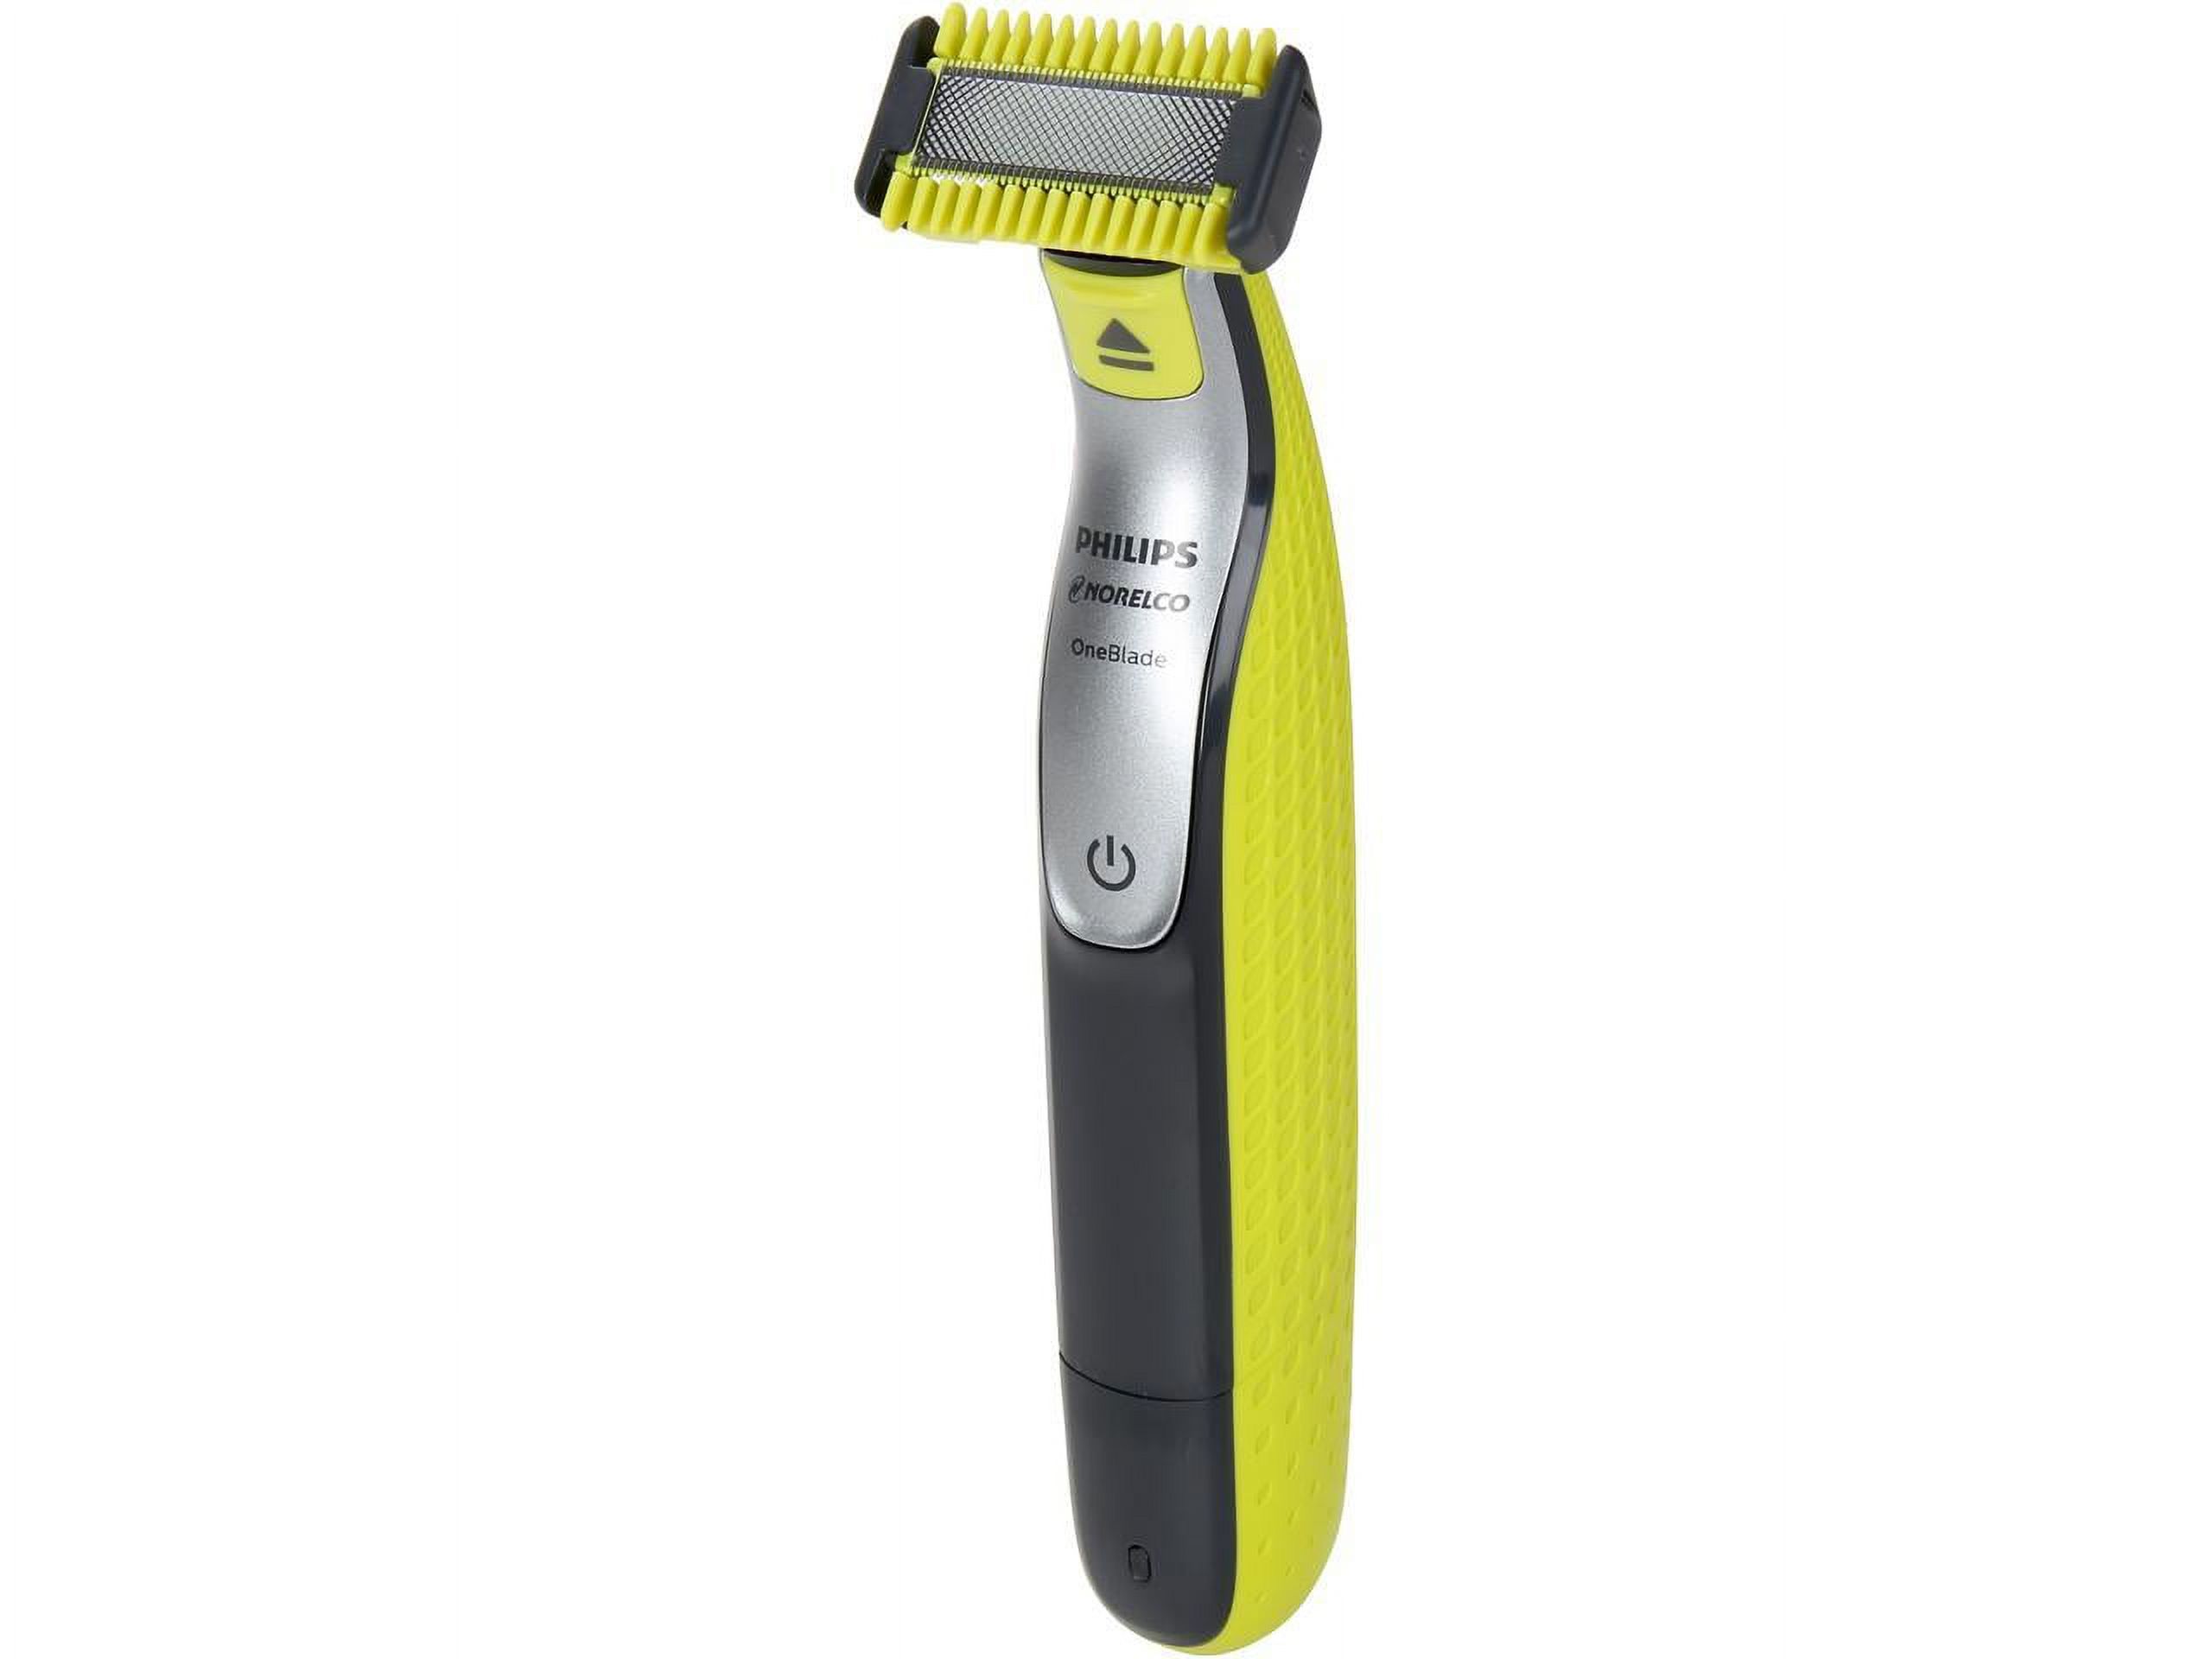 Philips Norelco Oneblade Face + Body  Hybrid Electric Trimmer and Shaver, QP2630/70 - image 1 of 6